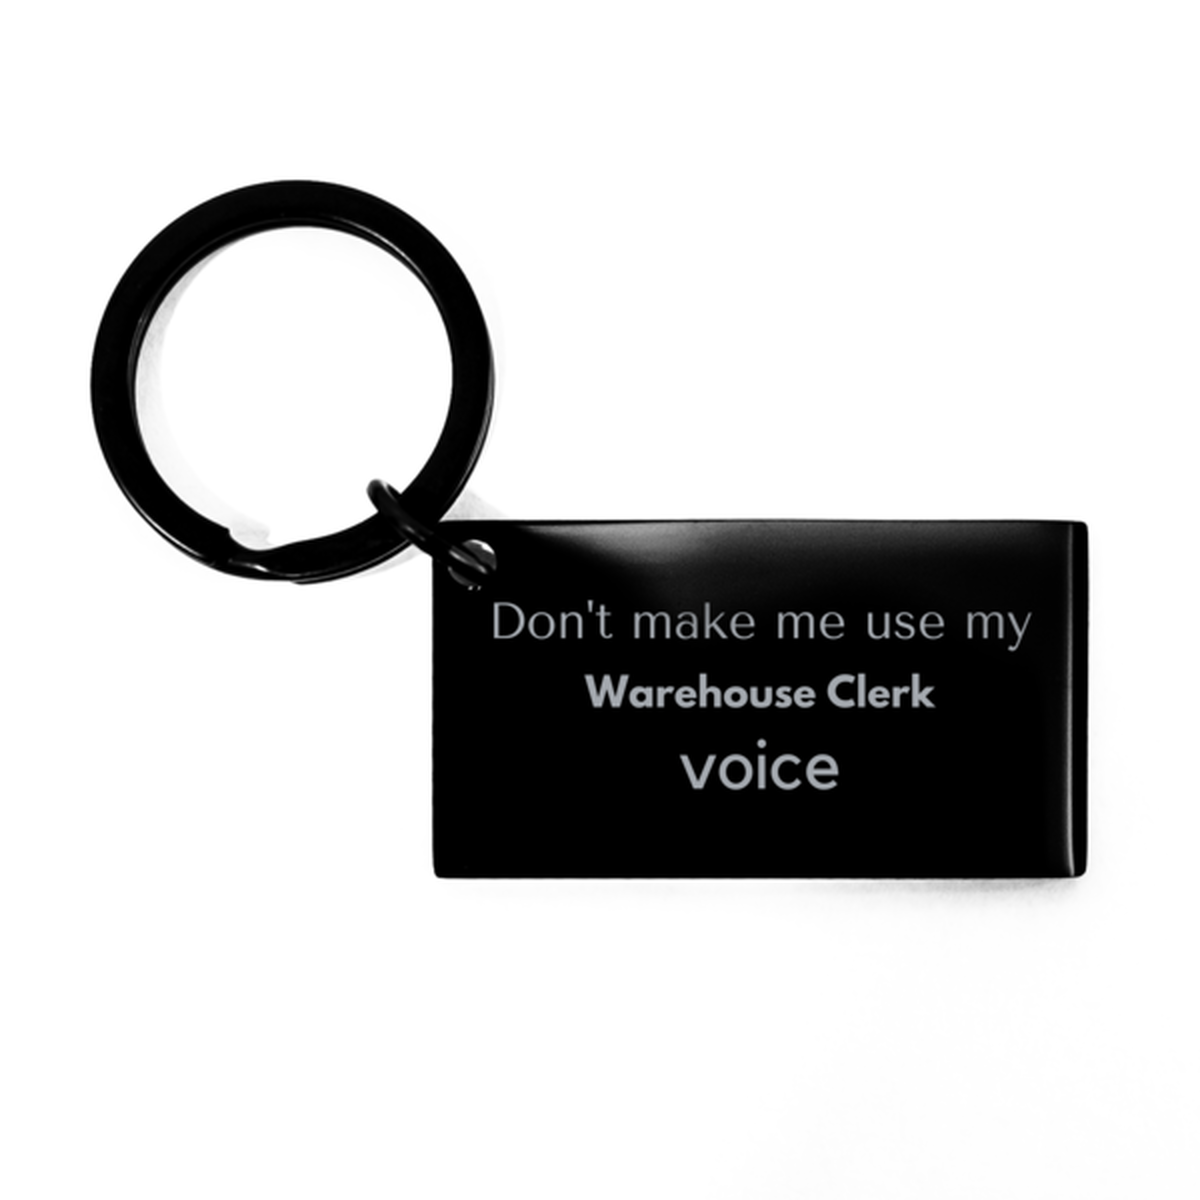 Don't make me use my Warehouse Clerk voice, Sarcasm Warehouse Clerk Gifts, Christmas Warehouse Clerk Keychain Birthday Unique Gifts For Warehouse Clerk Coworkers, Men, Women, Colleague, Friends